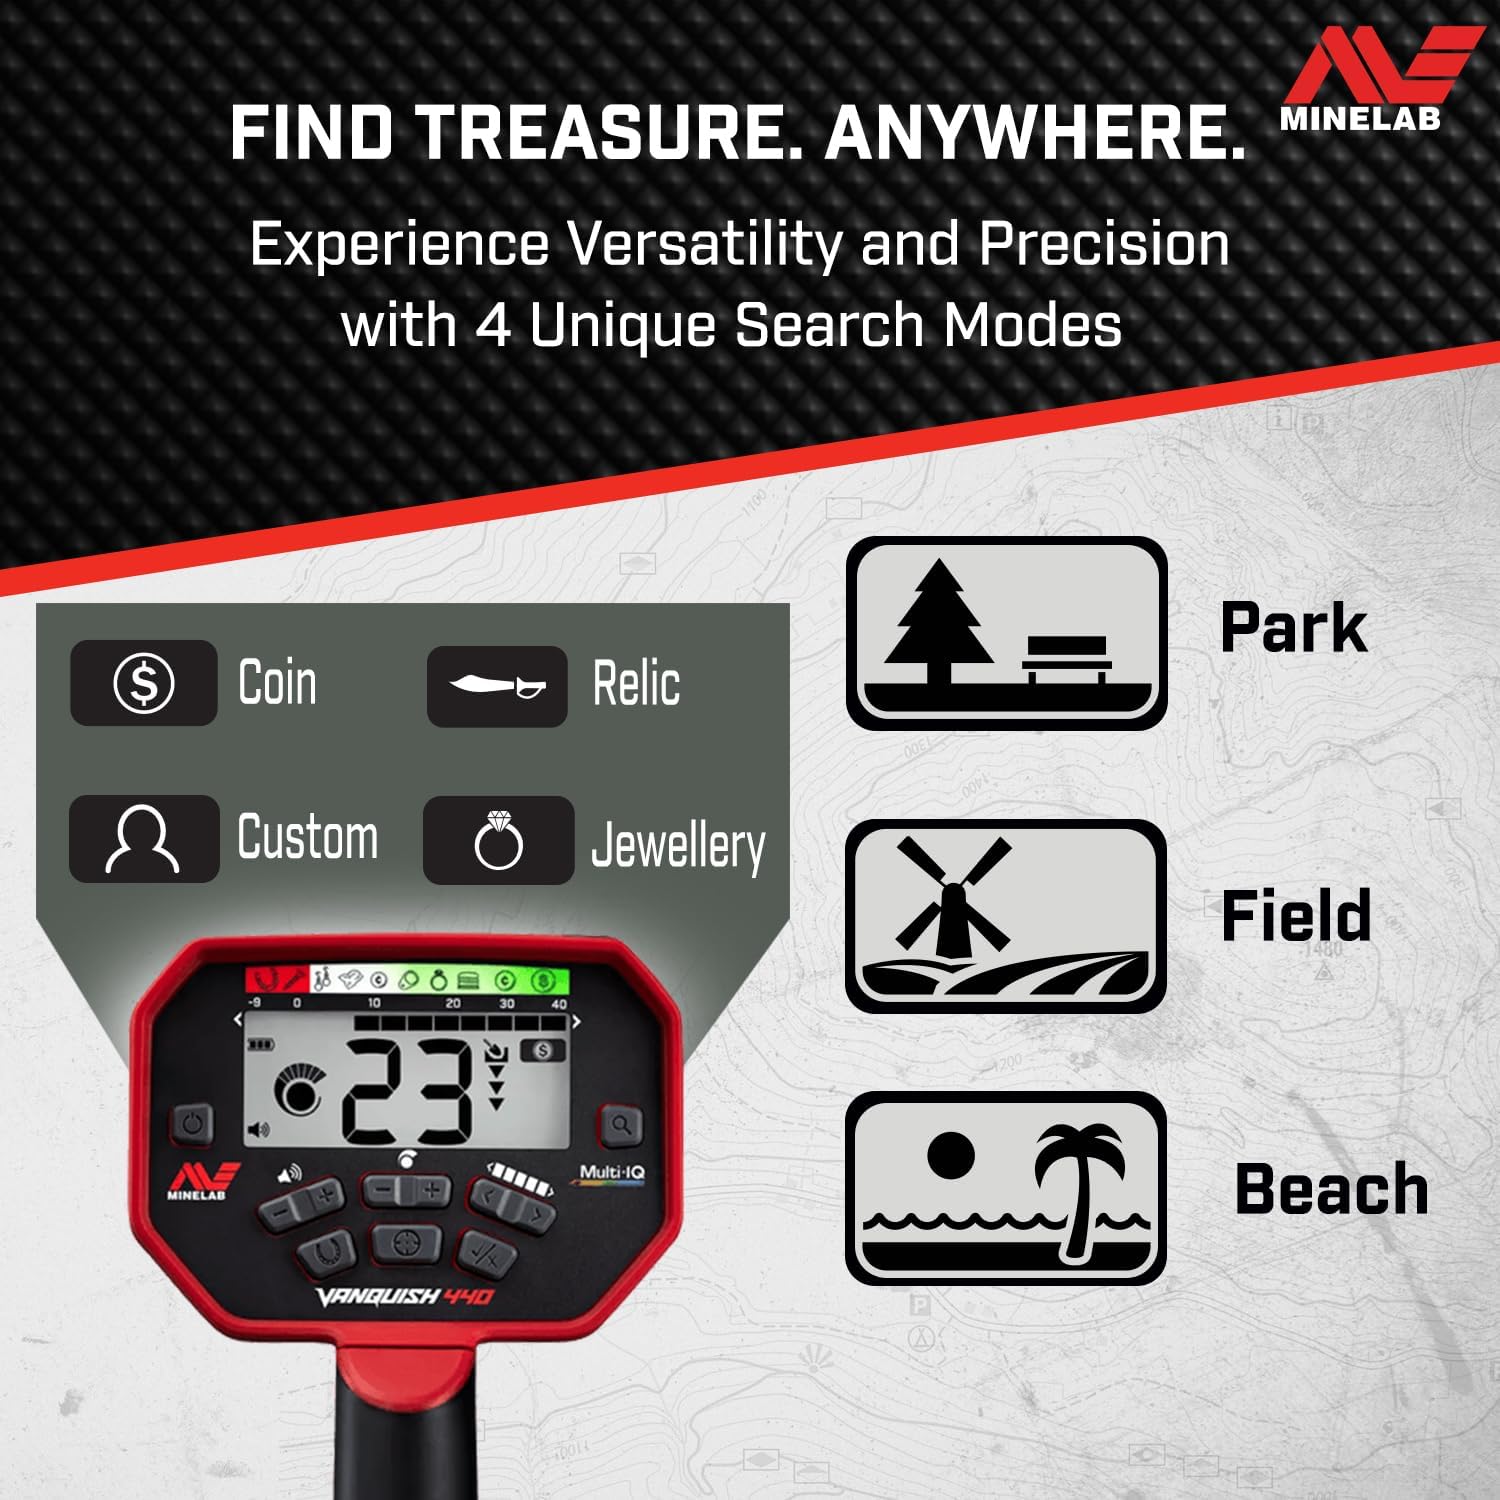 Minelab Vanquish 440 Multi-Frequency Pinpointing Metal Detector